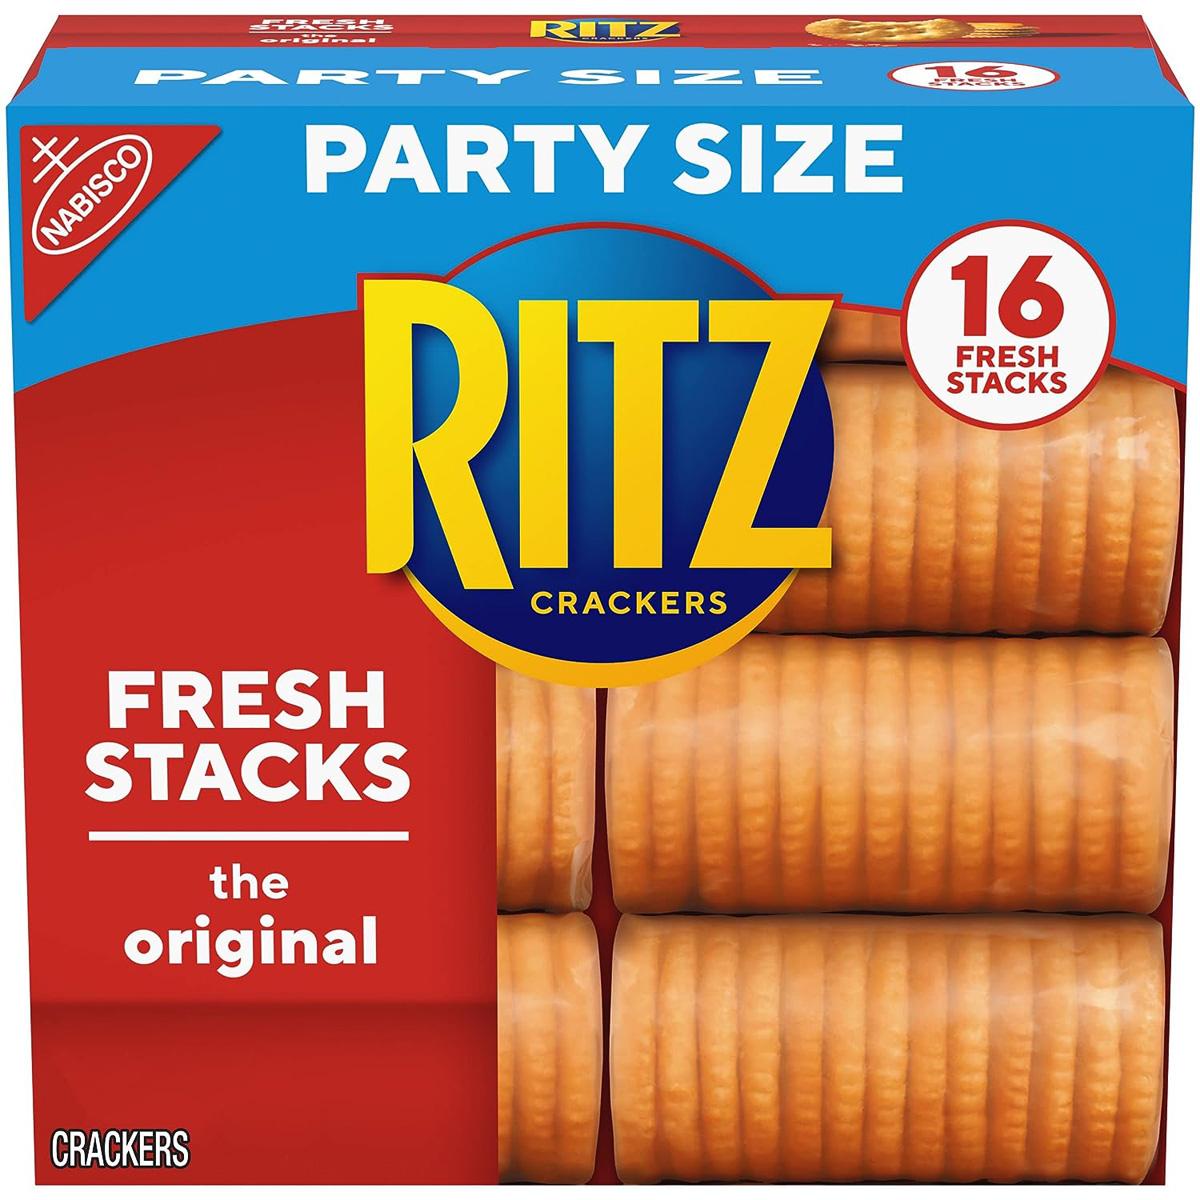 Ritz Crackers Party Size Box 2 Pack for $8.43 Shipped